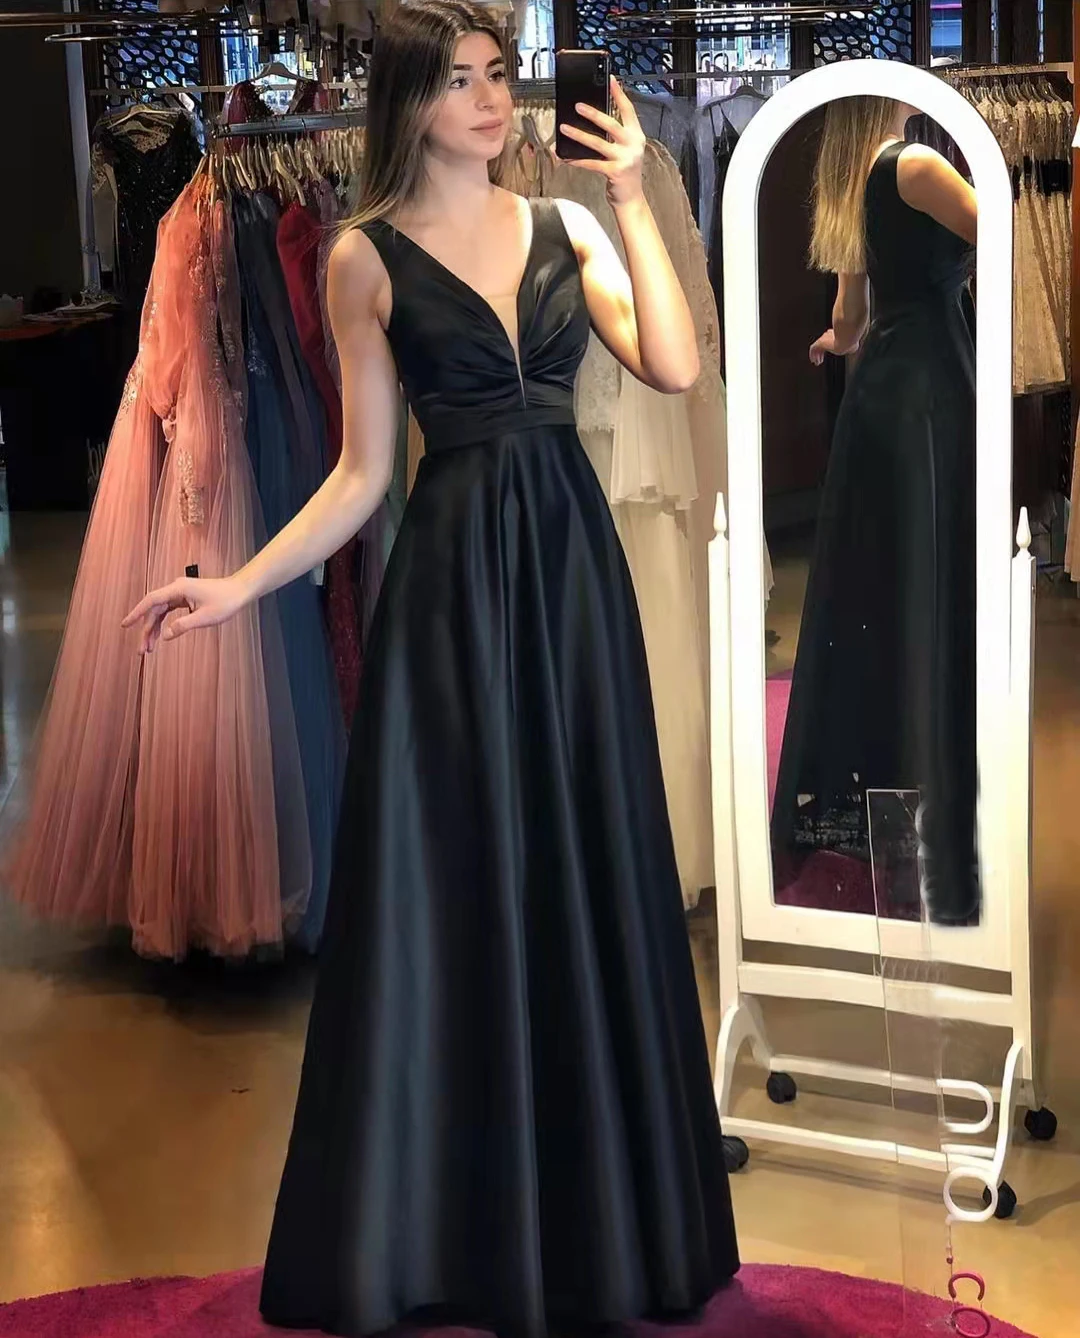 white evening dresses Deep V Neck Evening Dresses Long Satin A Line فساتين السهرة Empire Waist Party Prom Gown for Women plus size ball gowns Evening Dresses